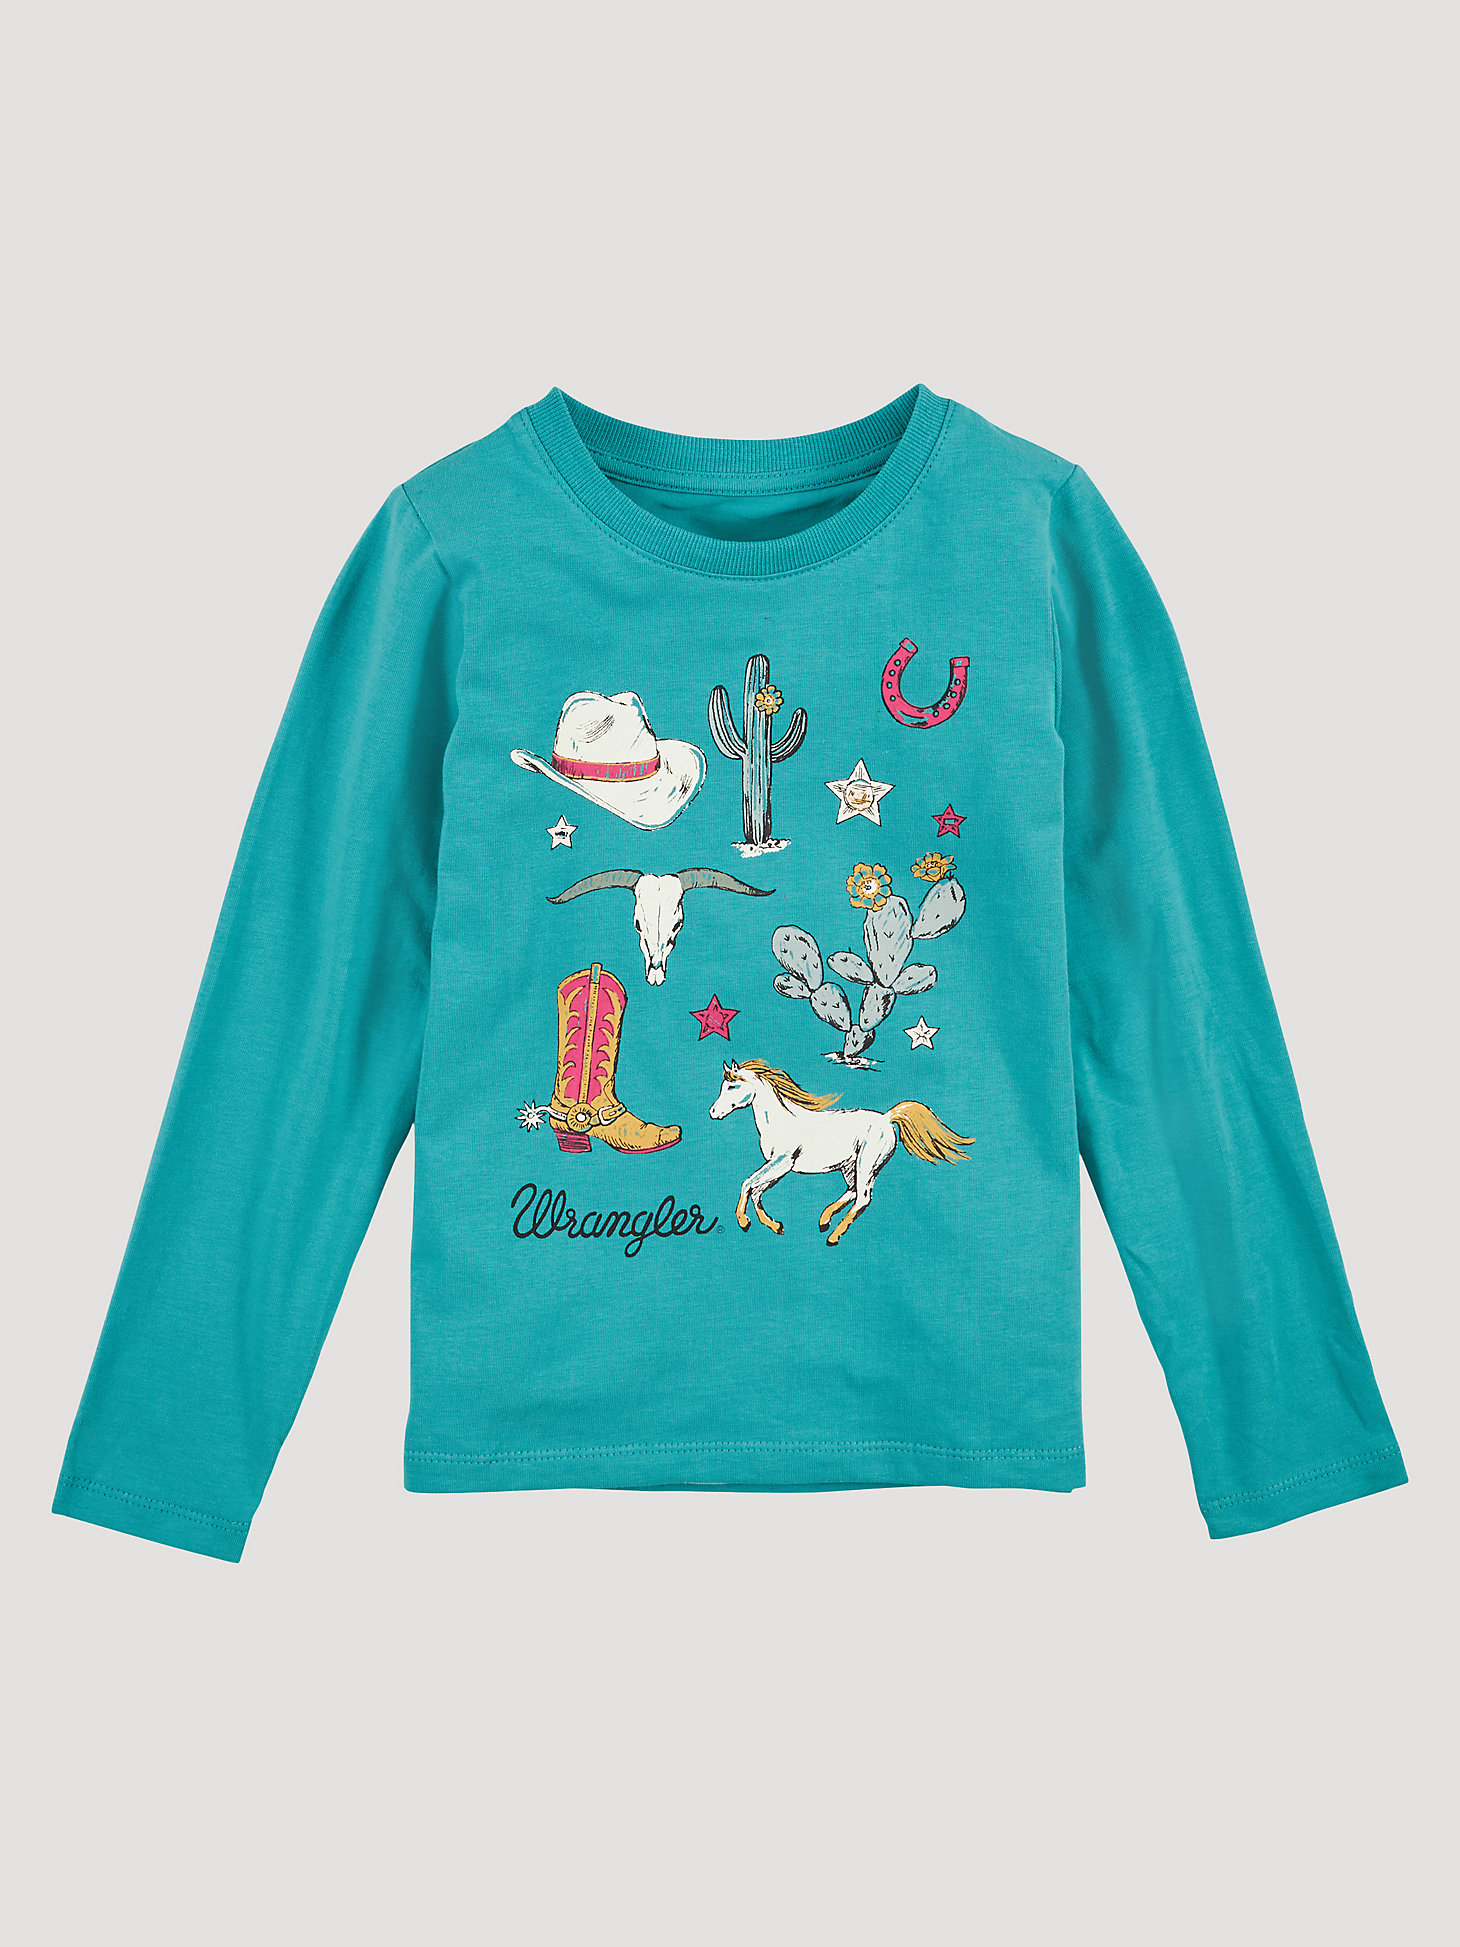 Girl's Long Sleeve Western Symbols Graphic T-Shirt in Teal alternative view 1